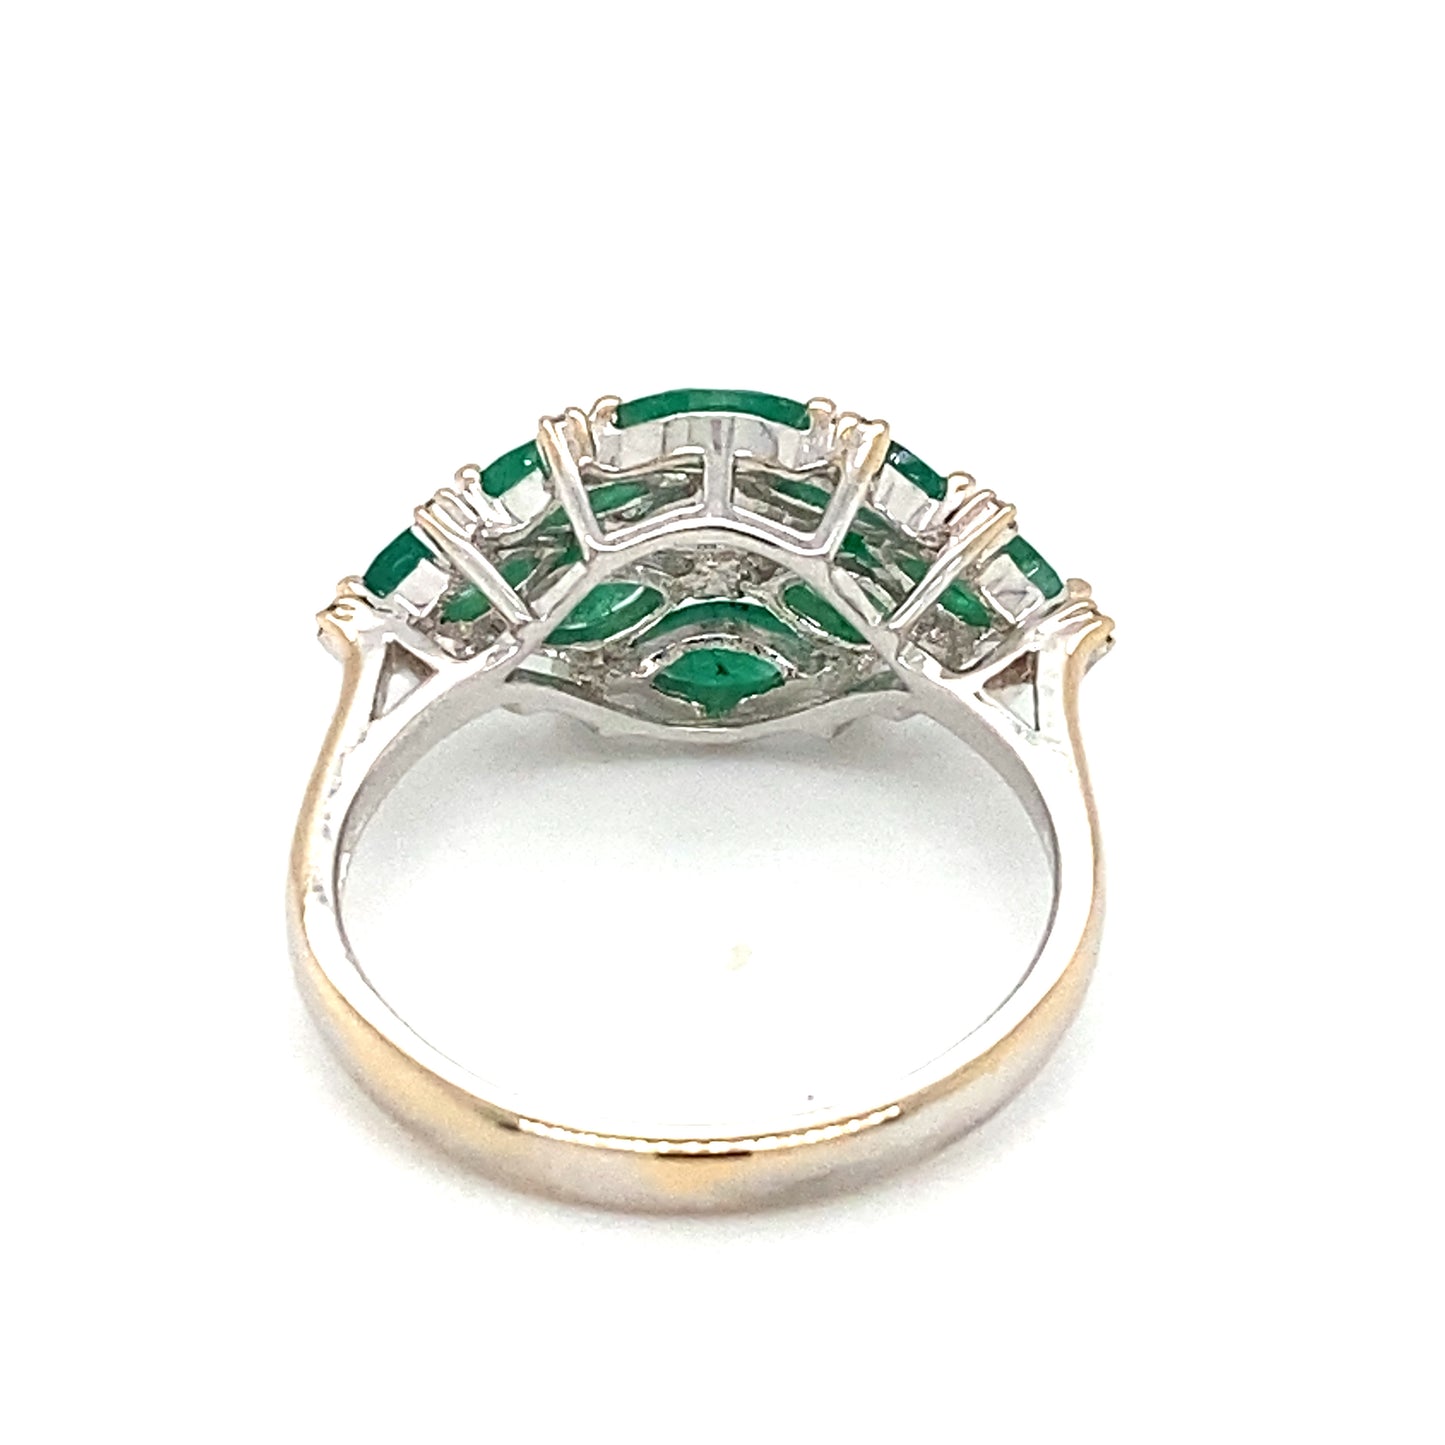 Circa 2000s Damas Jewelry Marquise Emerald and Diamond Ring in 18K White Gold